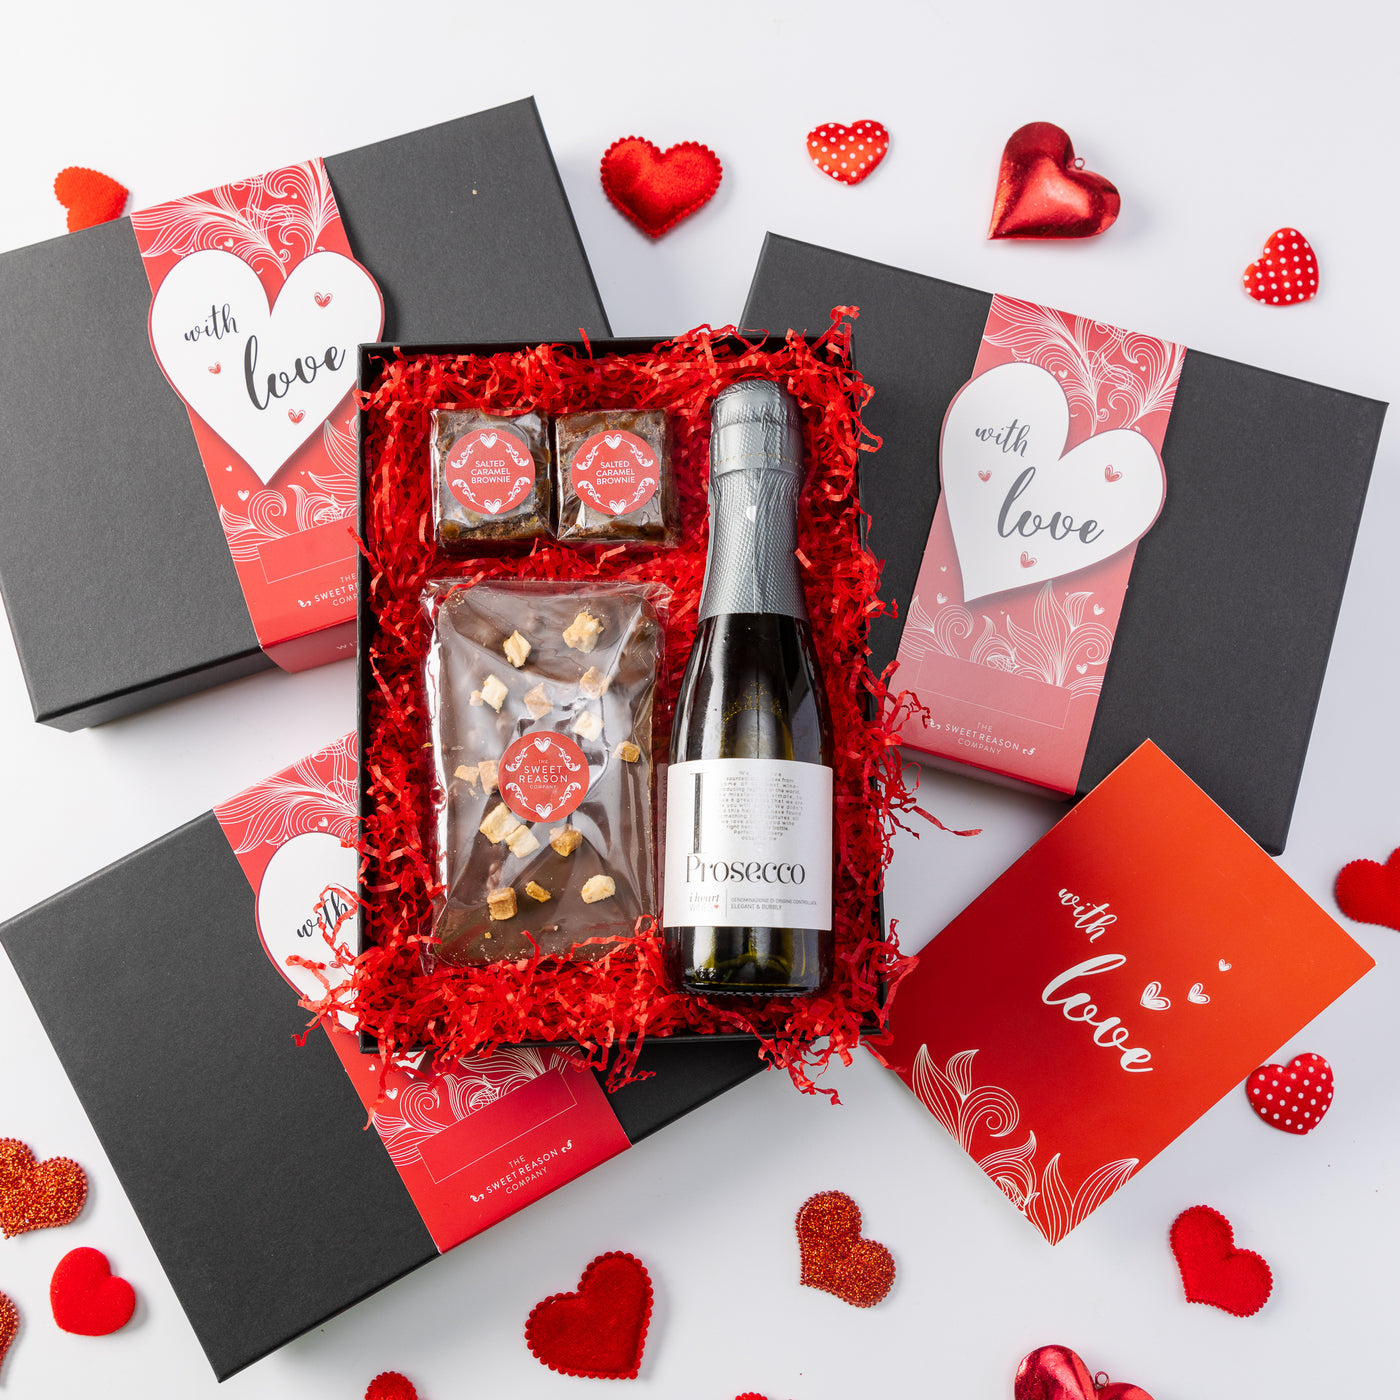 'With Love' Chocolate Slab, Brownies and Prosecco